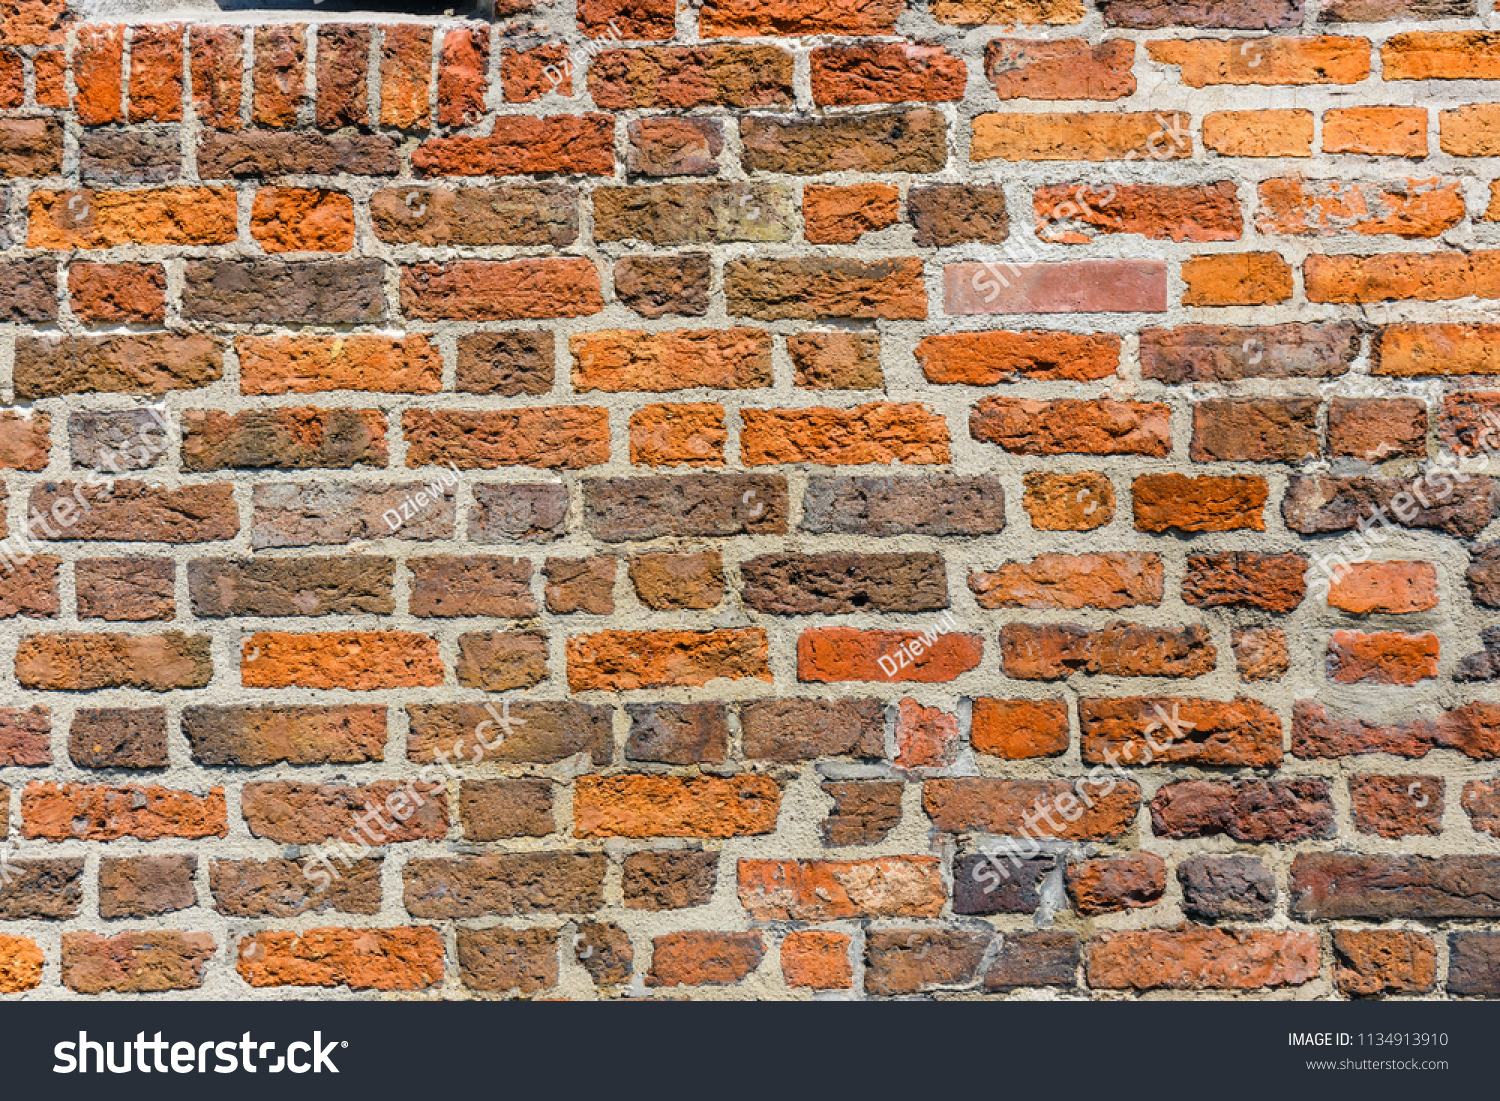 Brown brick wal asl grunge background with copy space #1134913910